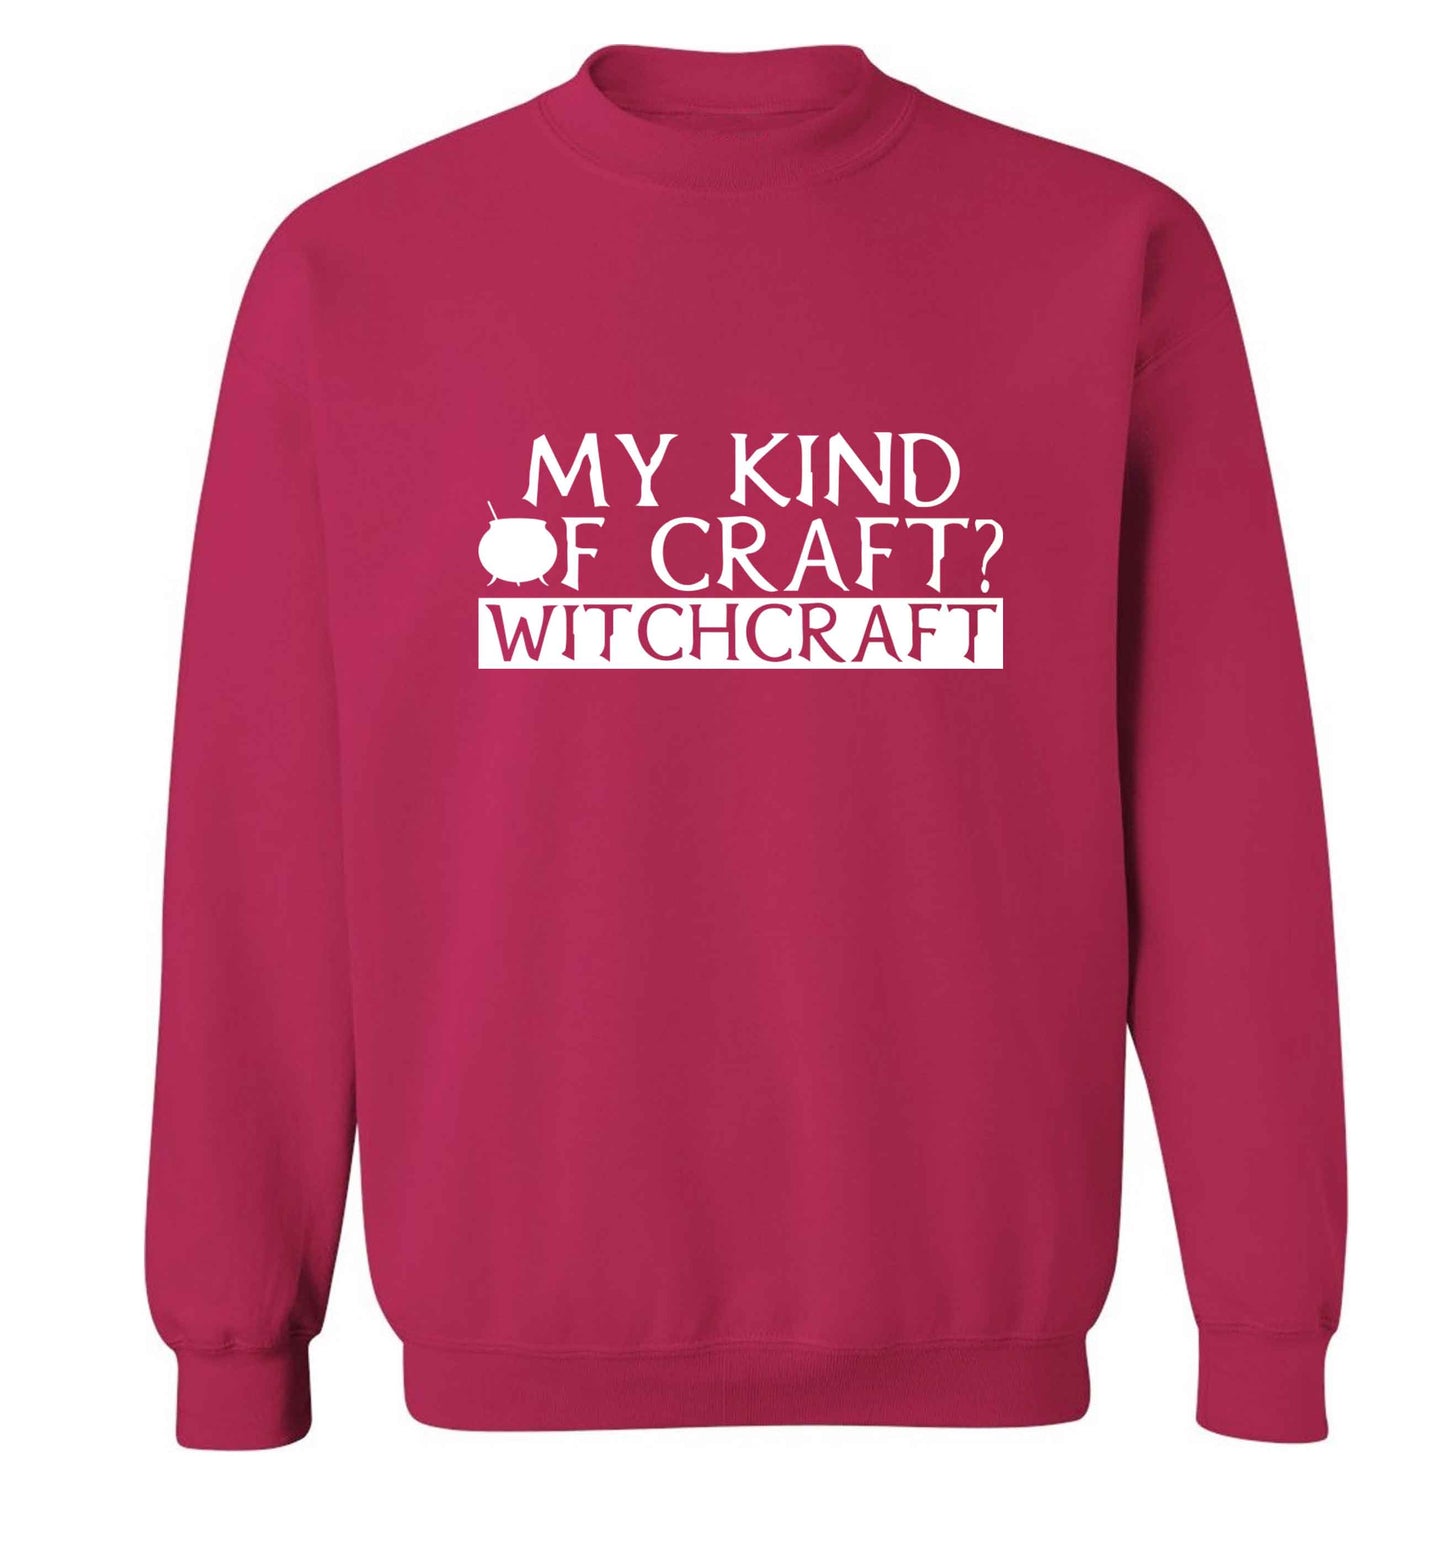 My king of craft? witchcraft  adult's unisex pink sweater 2XL